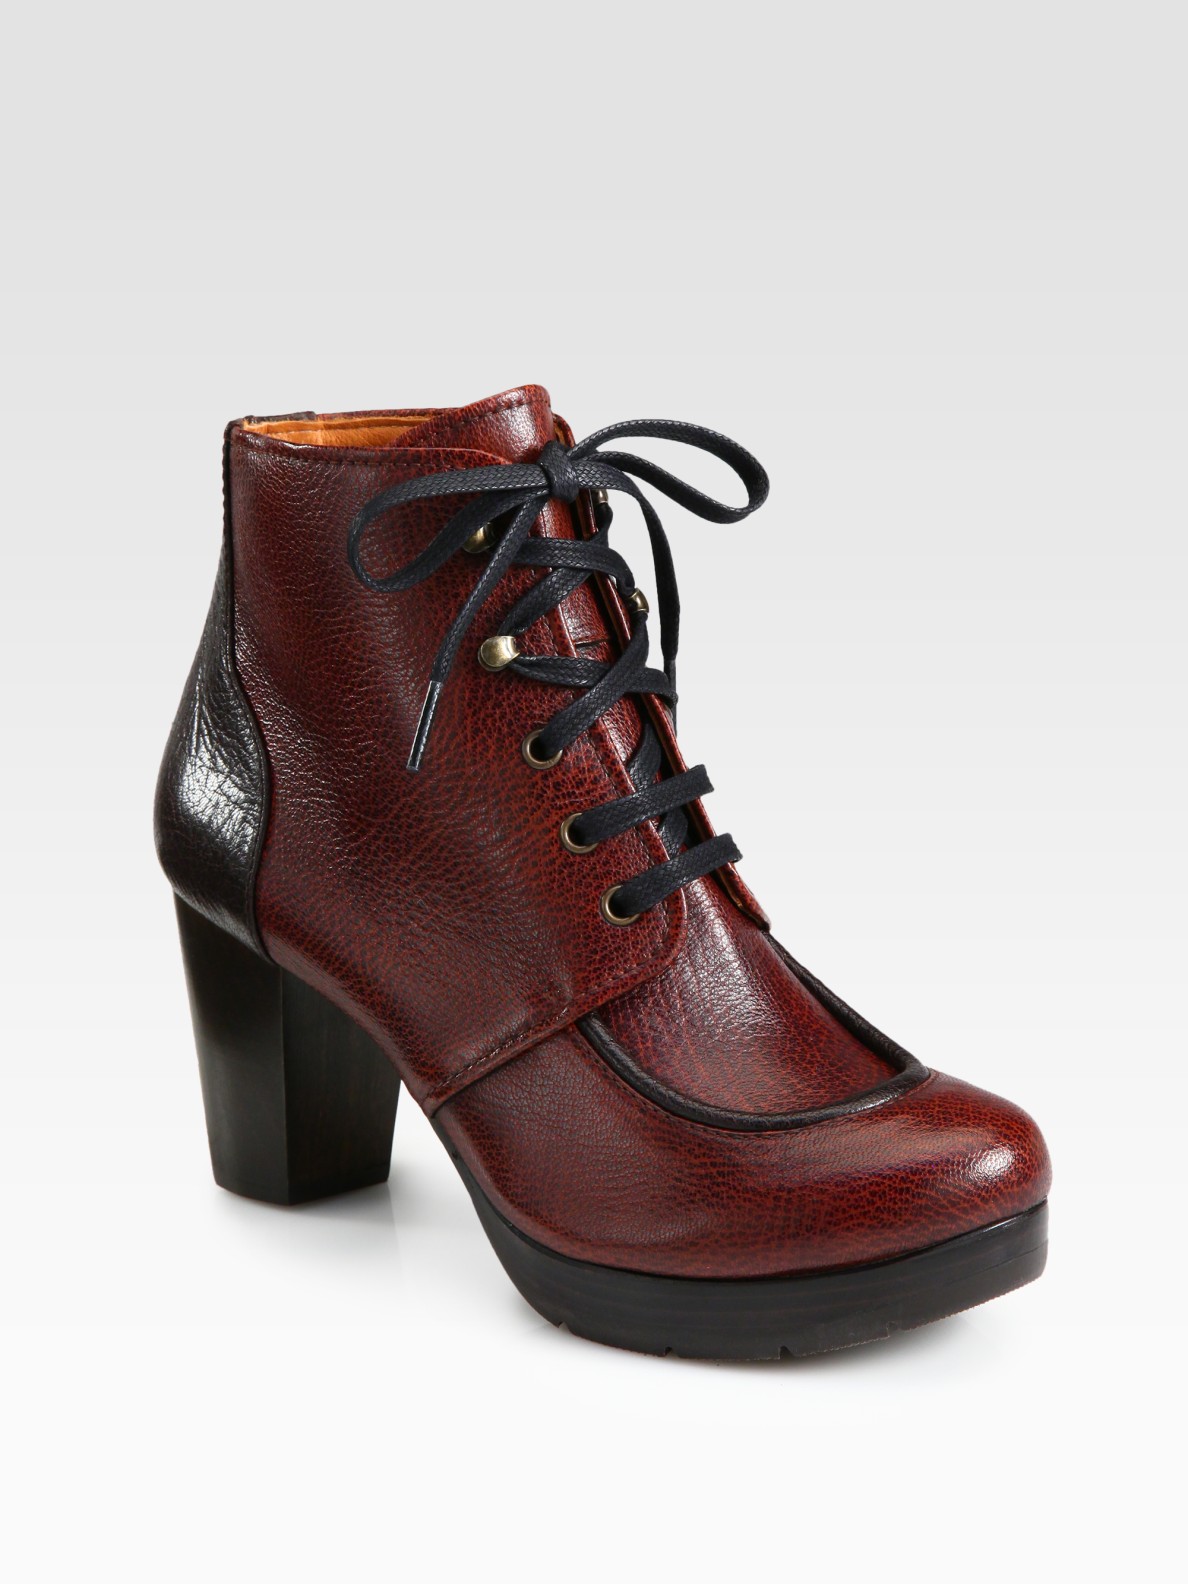 Lyst - Chie Mihara Bicolor Leather Laceup Ankle Boots in Purple